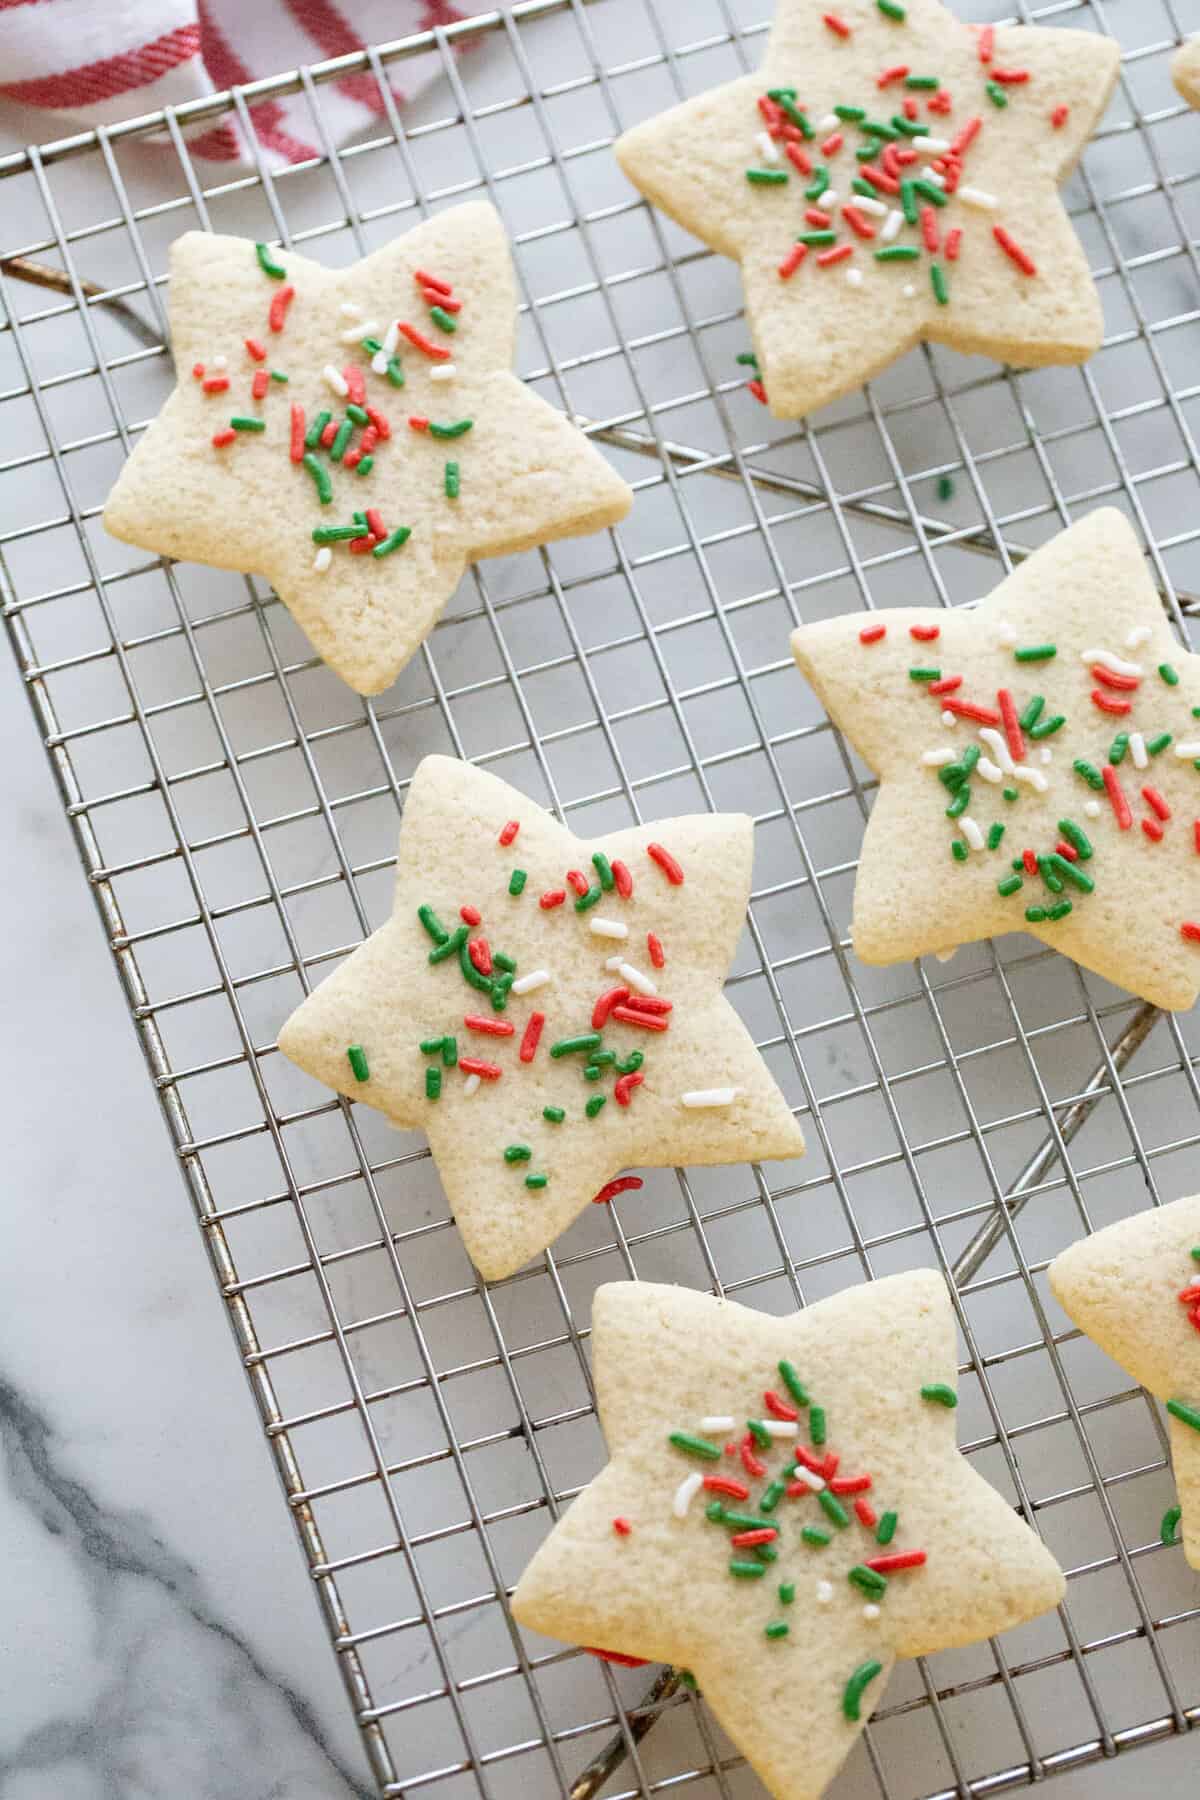 Six star shaped sugar cookies on a wire cooling rack.